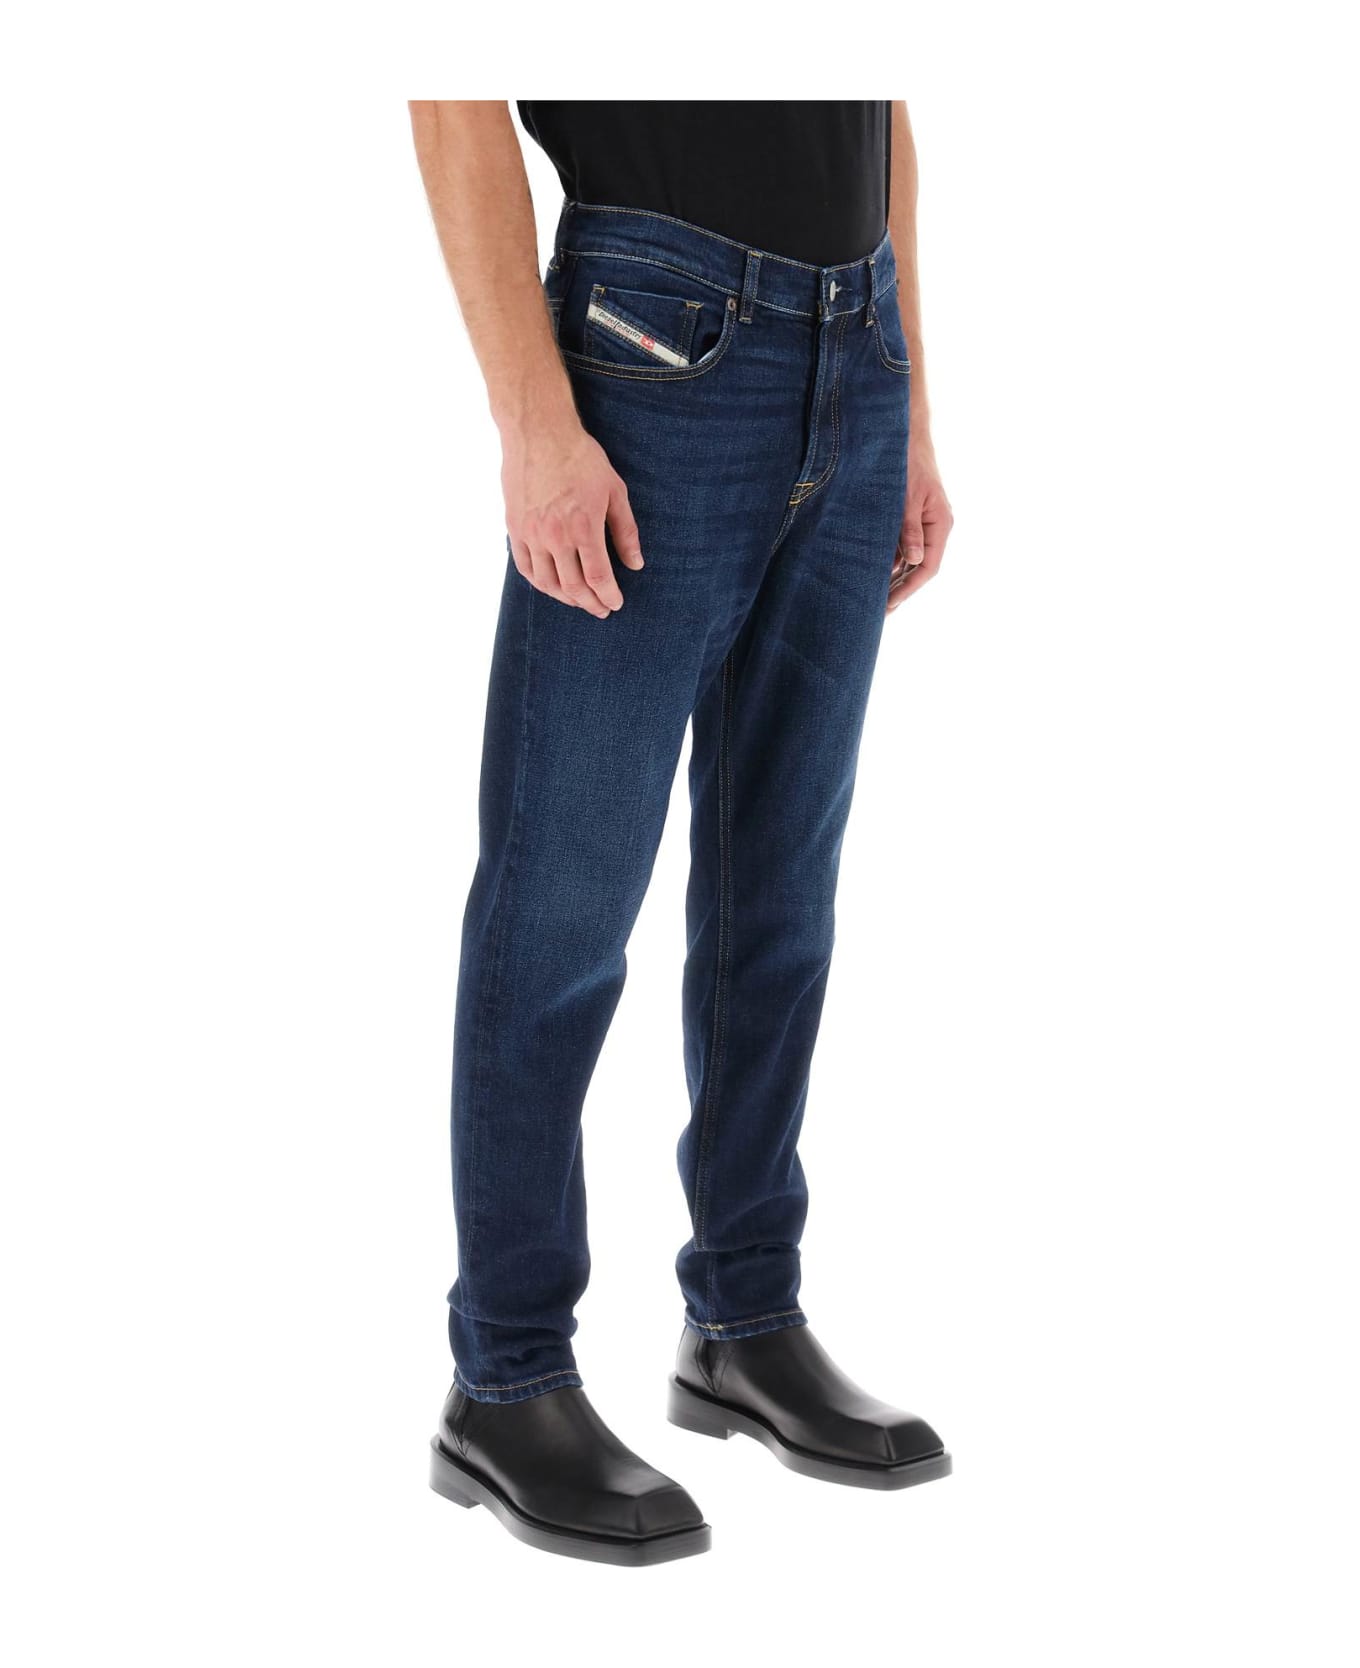 Diesel 'd-fining' Jeans With Tapered Leg - Blu scuro